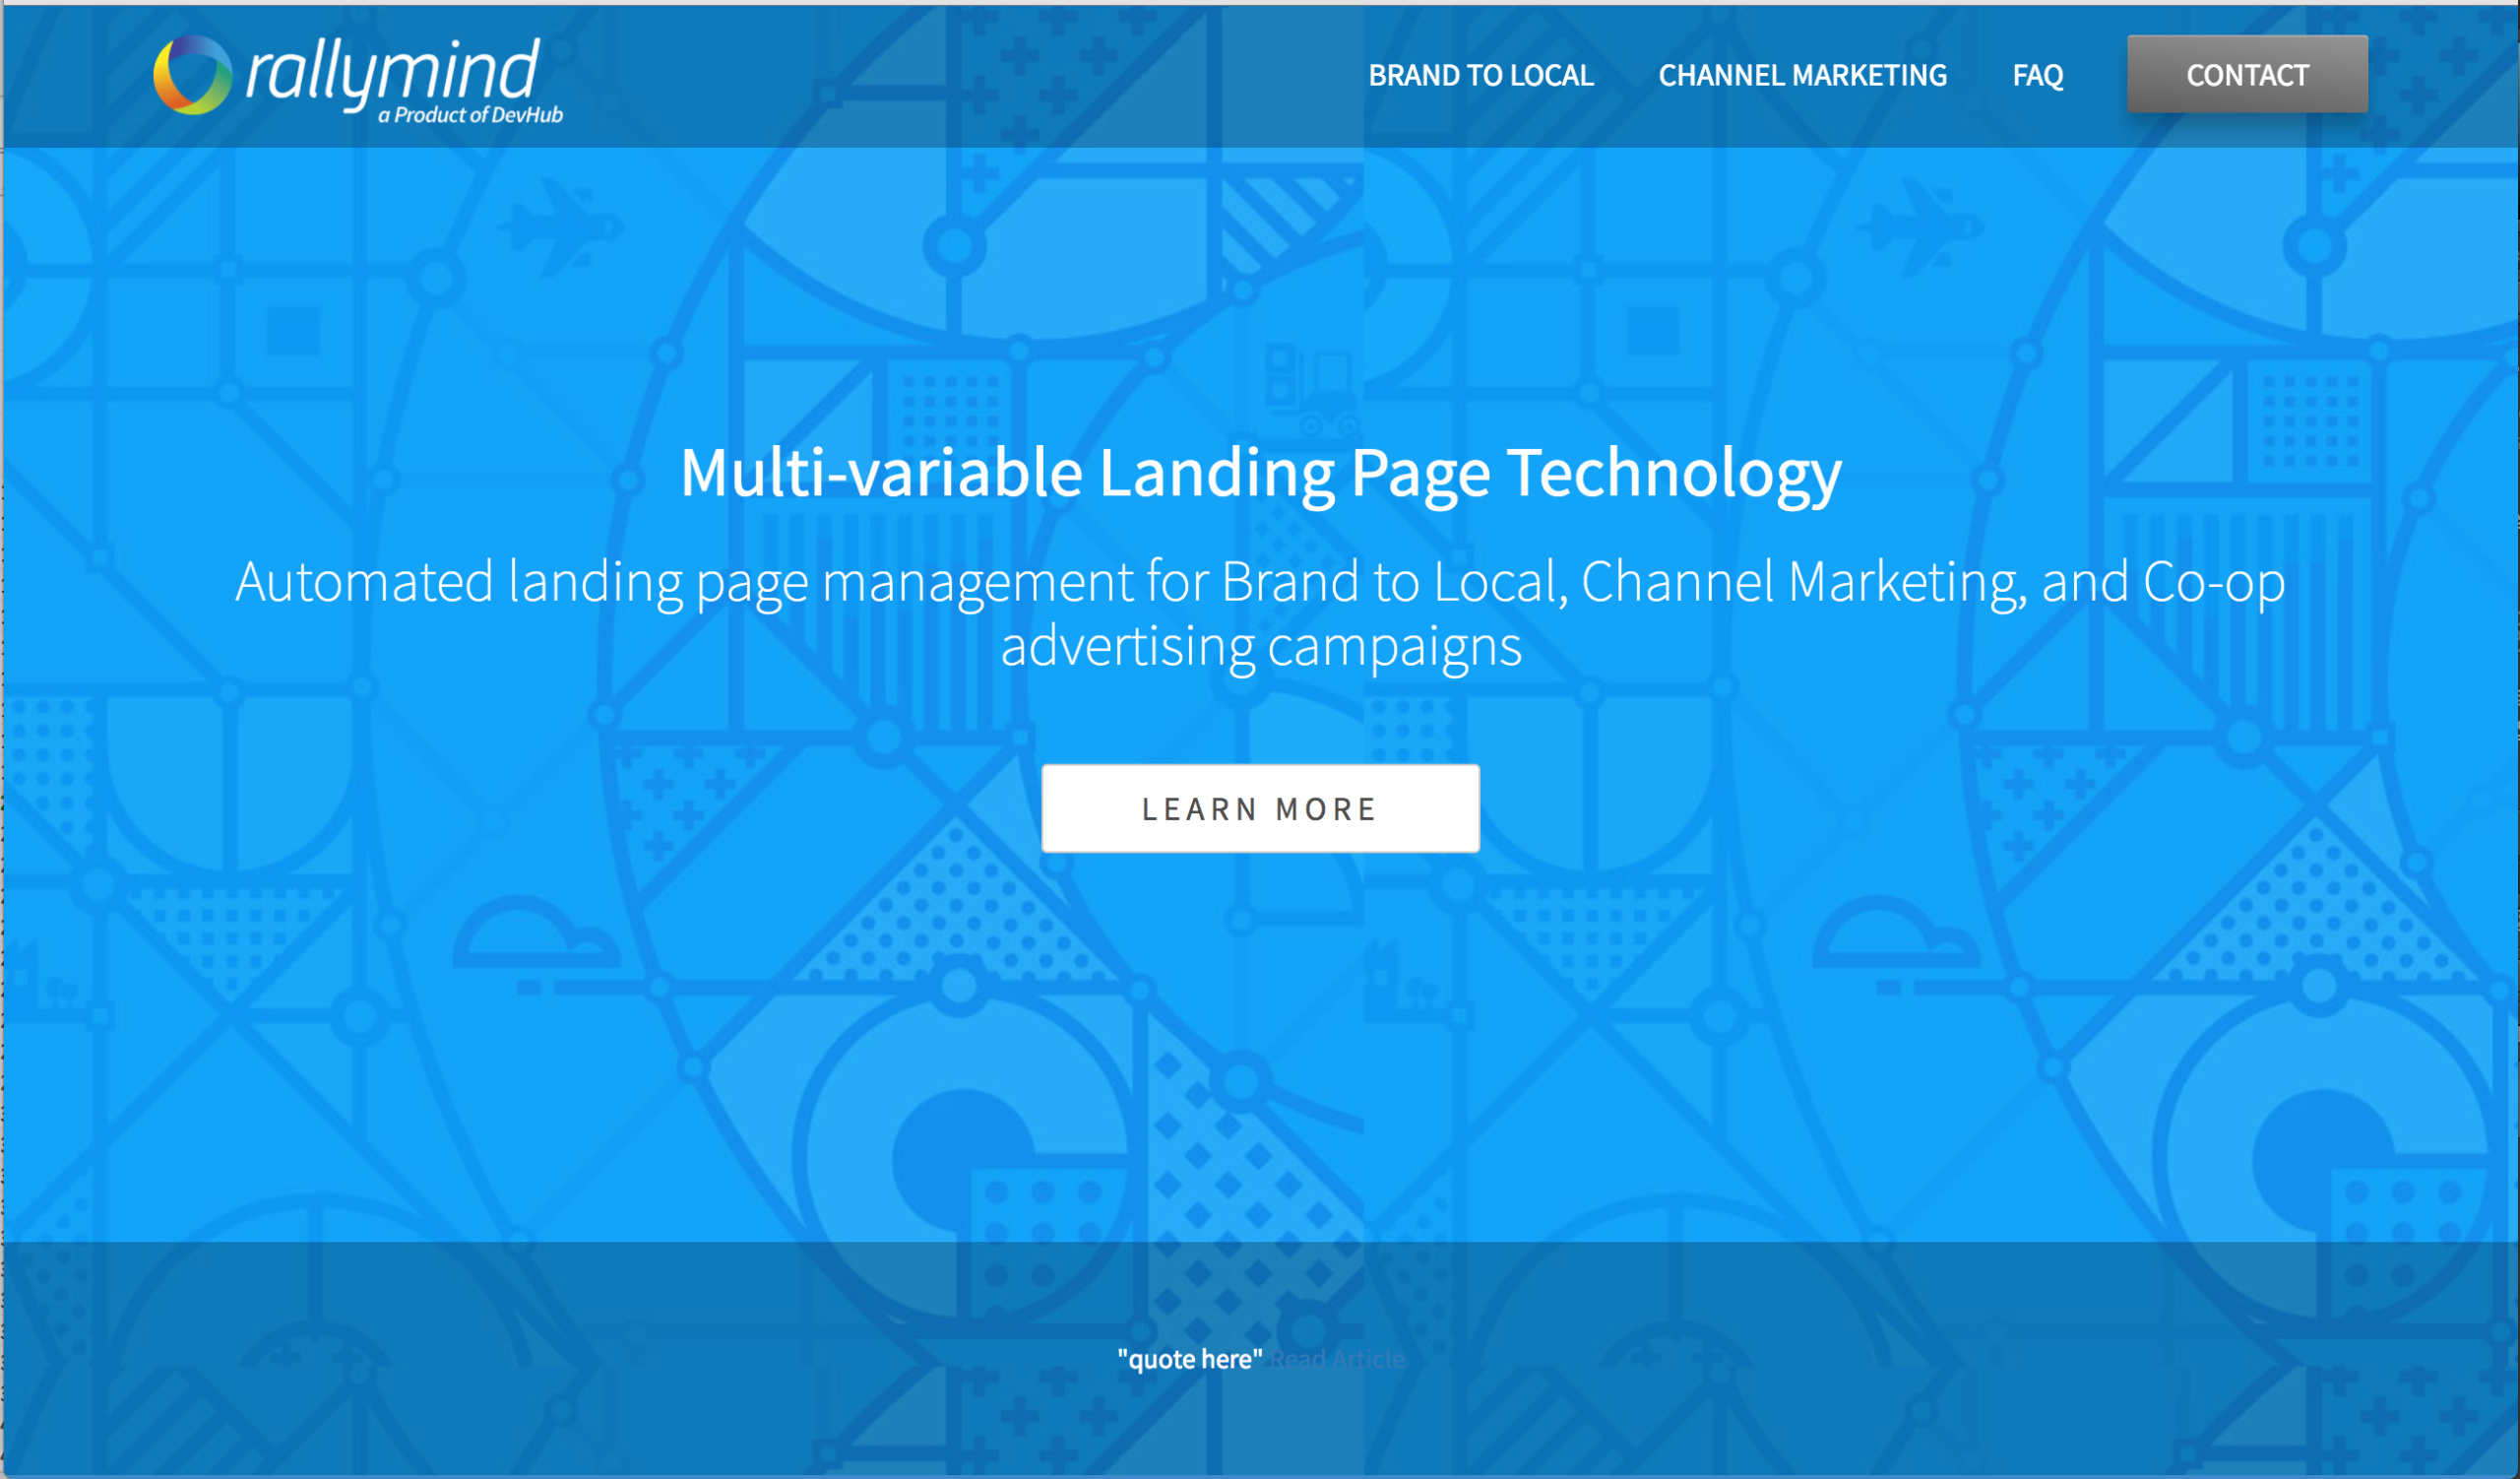 How Companies are Increasing ROIs with RallyMind's Landing Page Management Technology